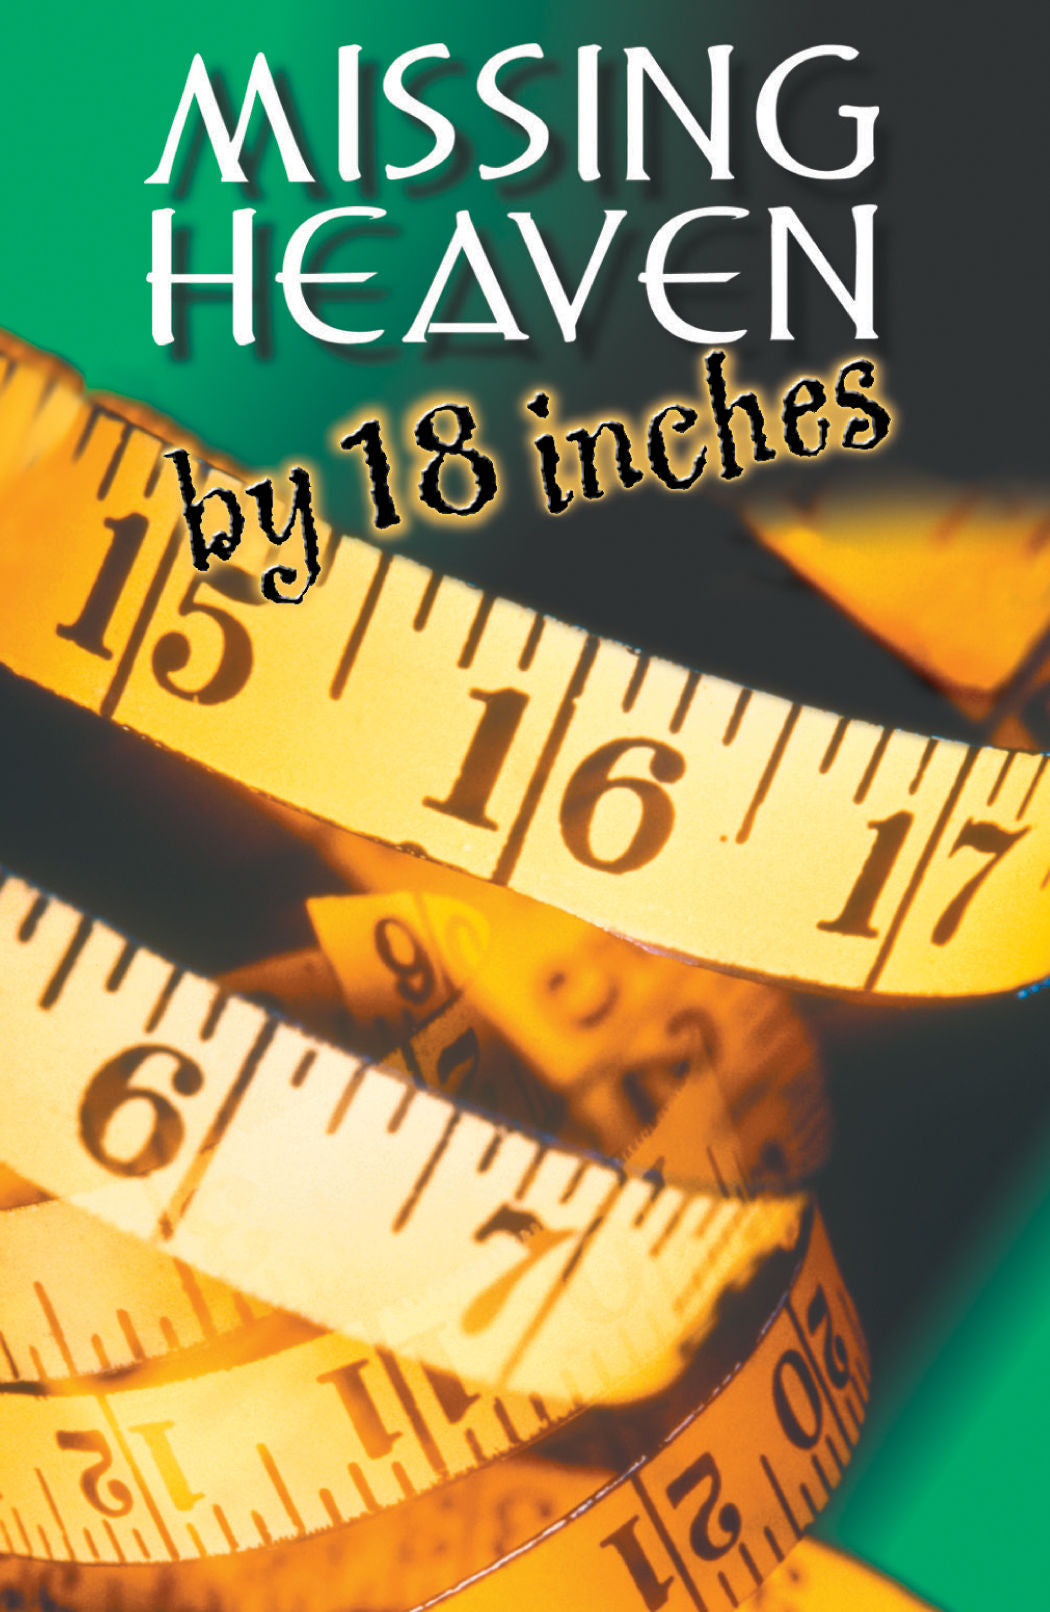 Image of Missing Heaven By 18 Inches (Pack Of 25) other